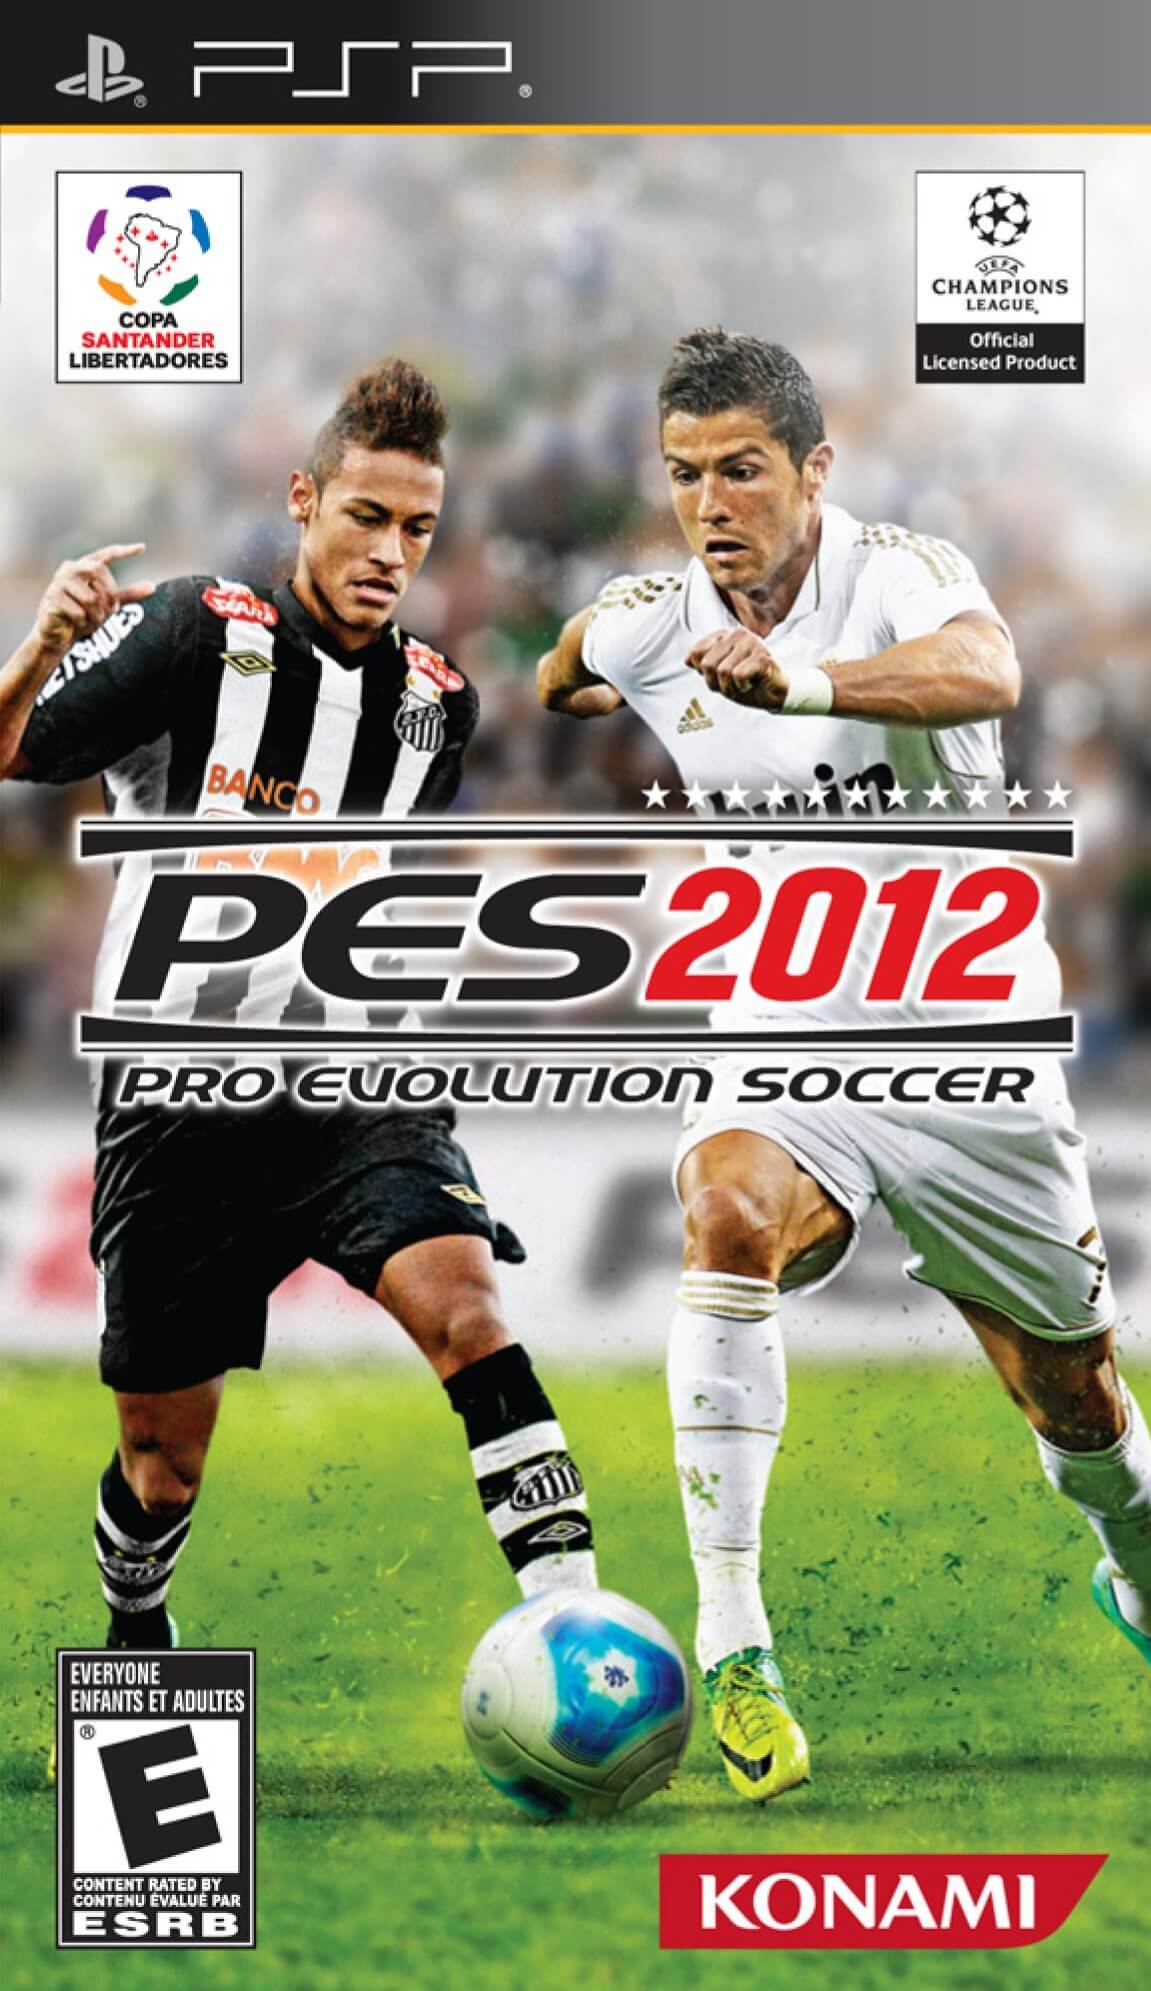 New ppsspp pes 2012 Pro evolution 12 Tips APK + Mod for Android.